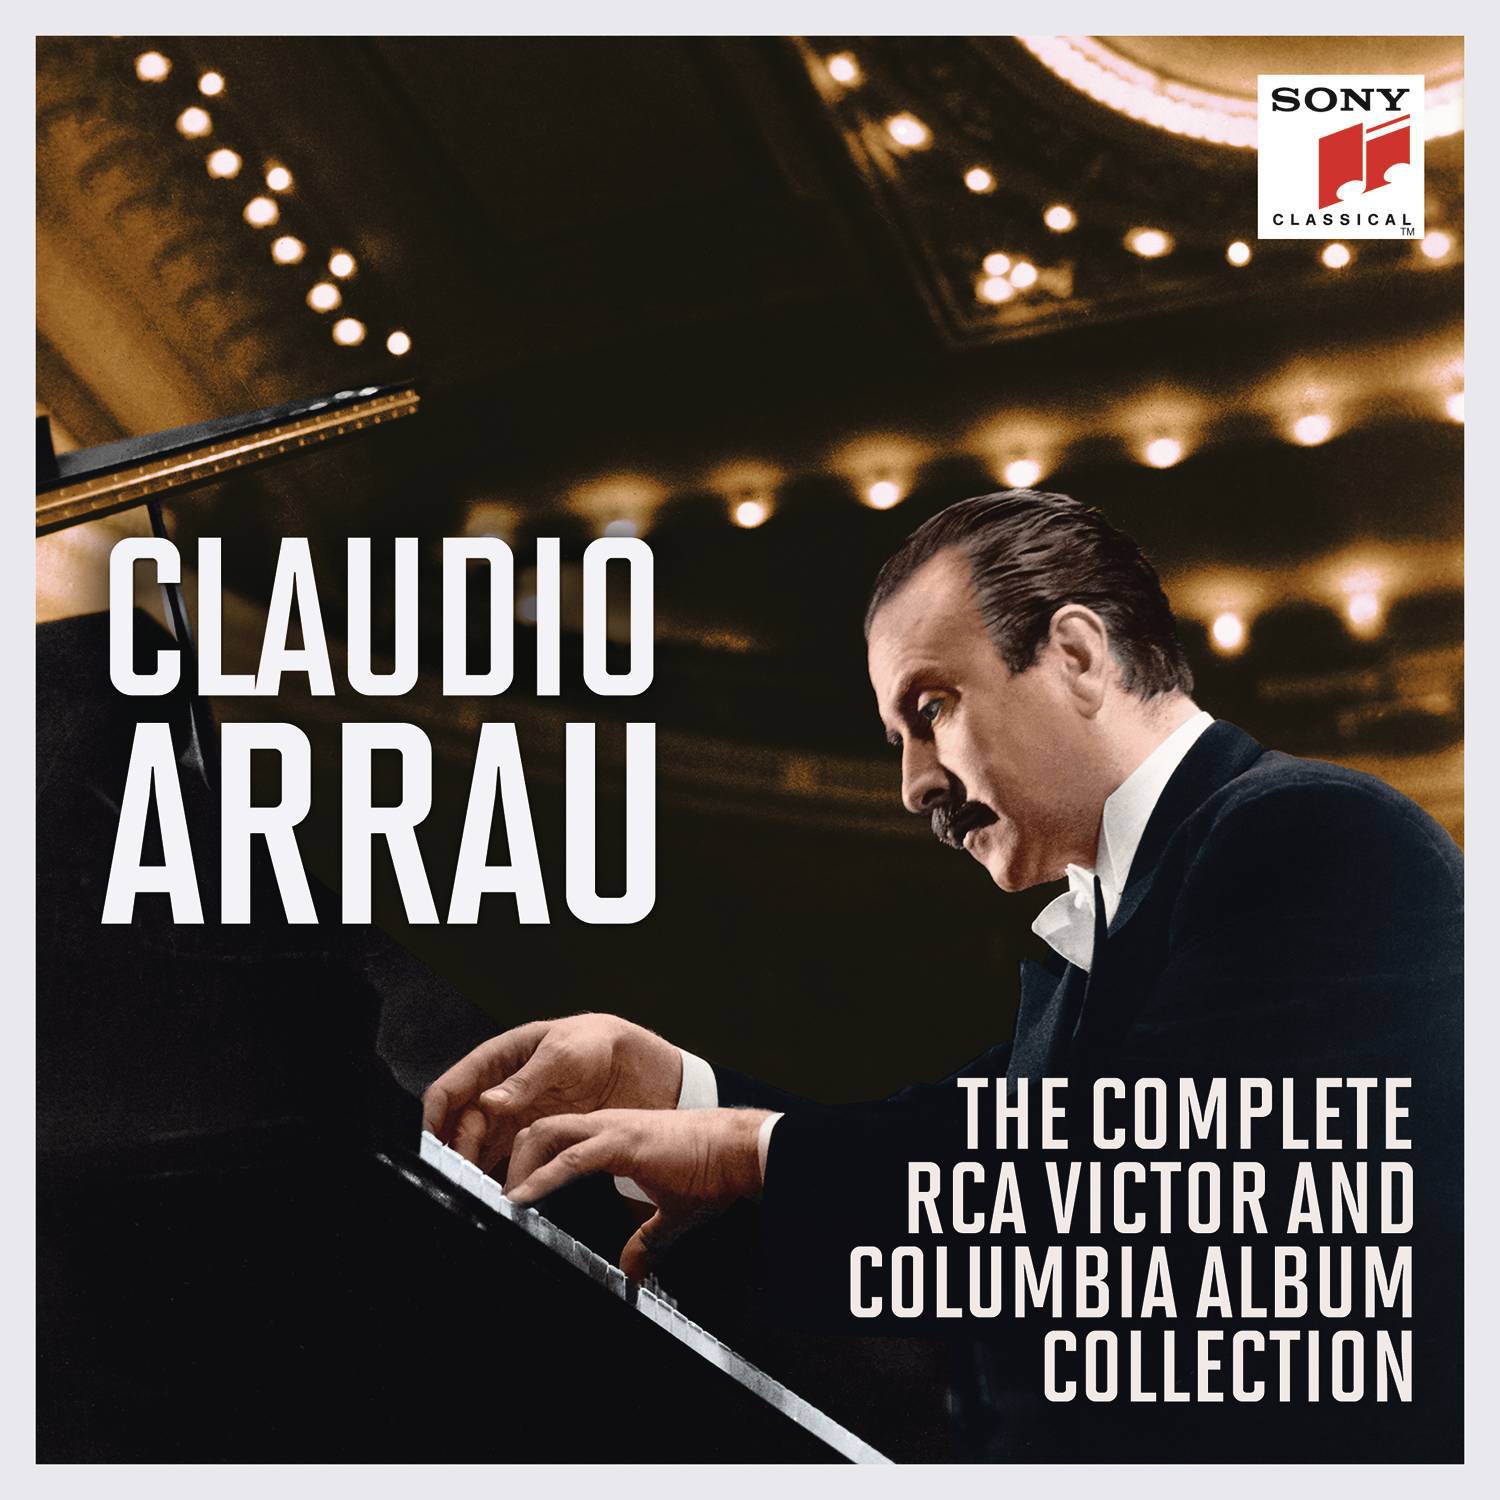 Claudio Arrau - The Complete RCA Victor and Columbia Album Collection